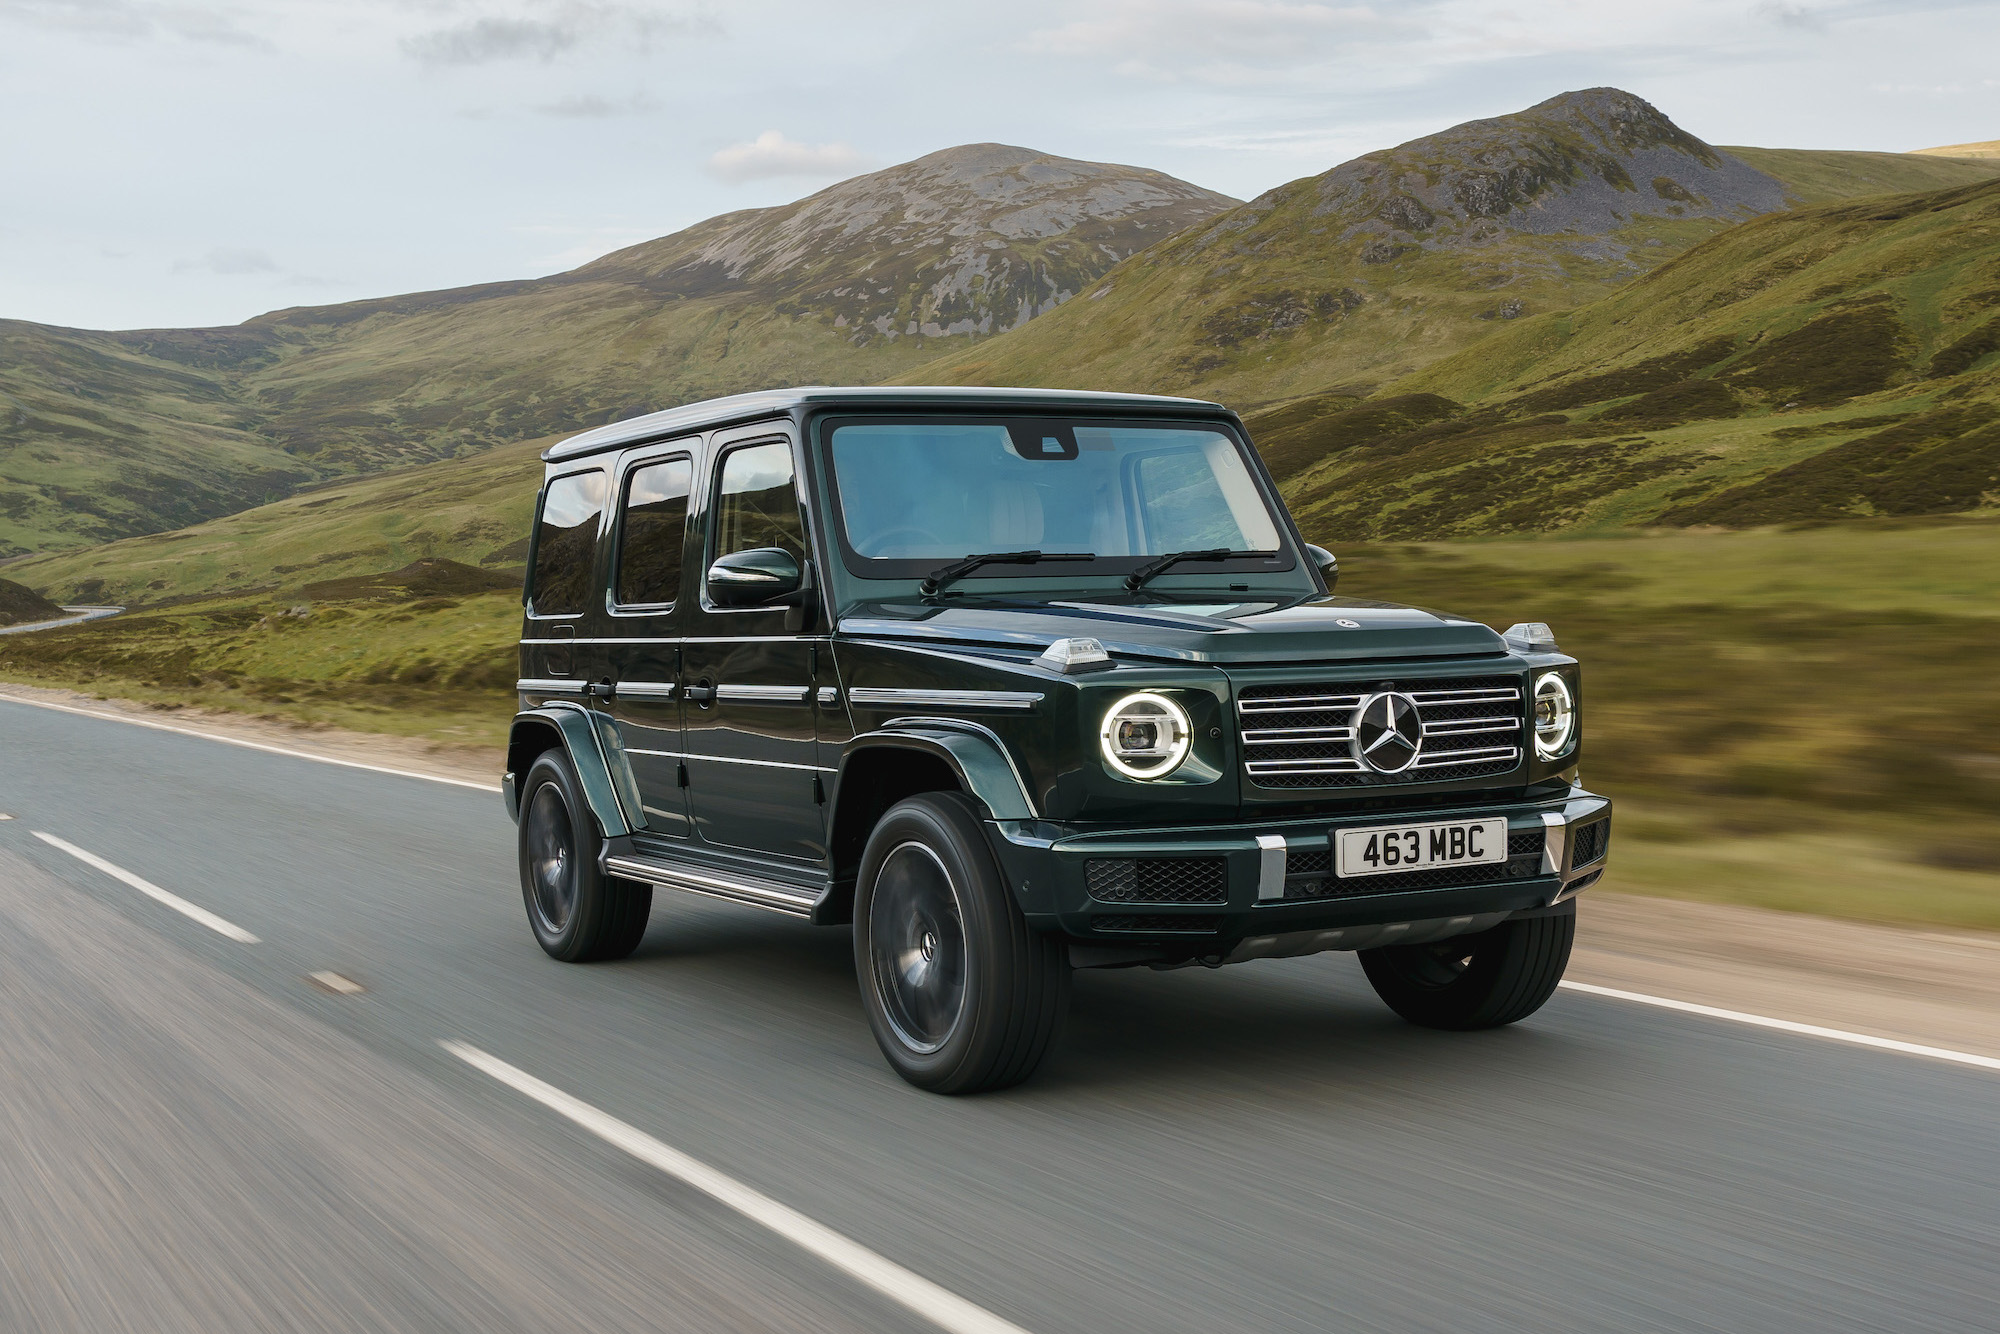 G Klasse Amg Preis Mercedes G-Class Review 2023 | Performance & Pricing | carwow